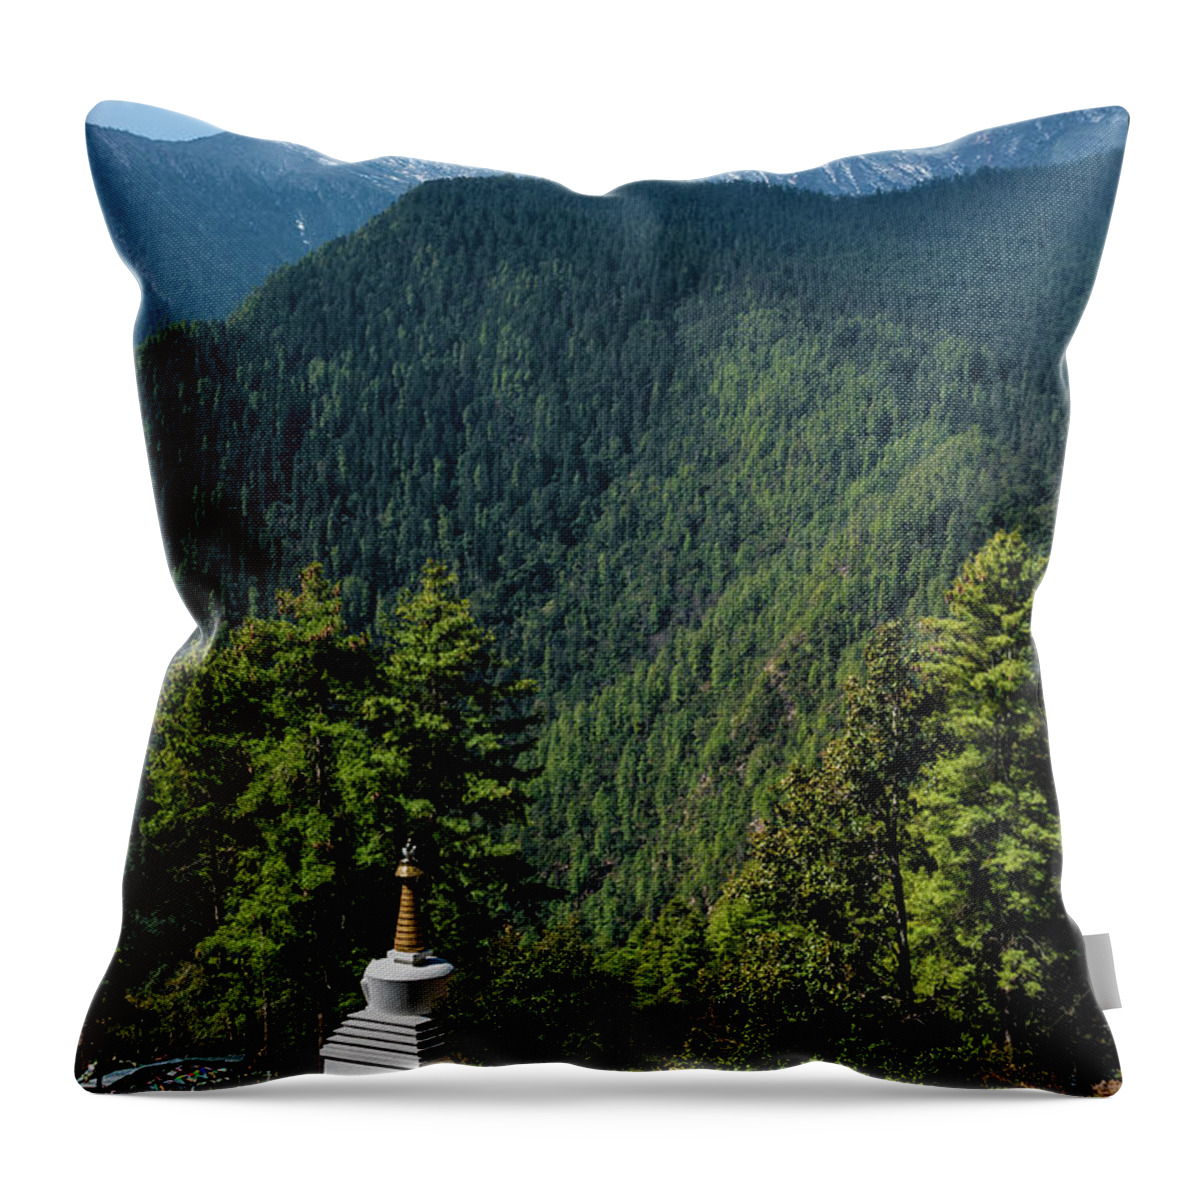 Education Throw Pillow featuring the photograph Tango Bouddhist University College by Ducoin David